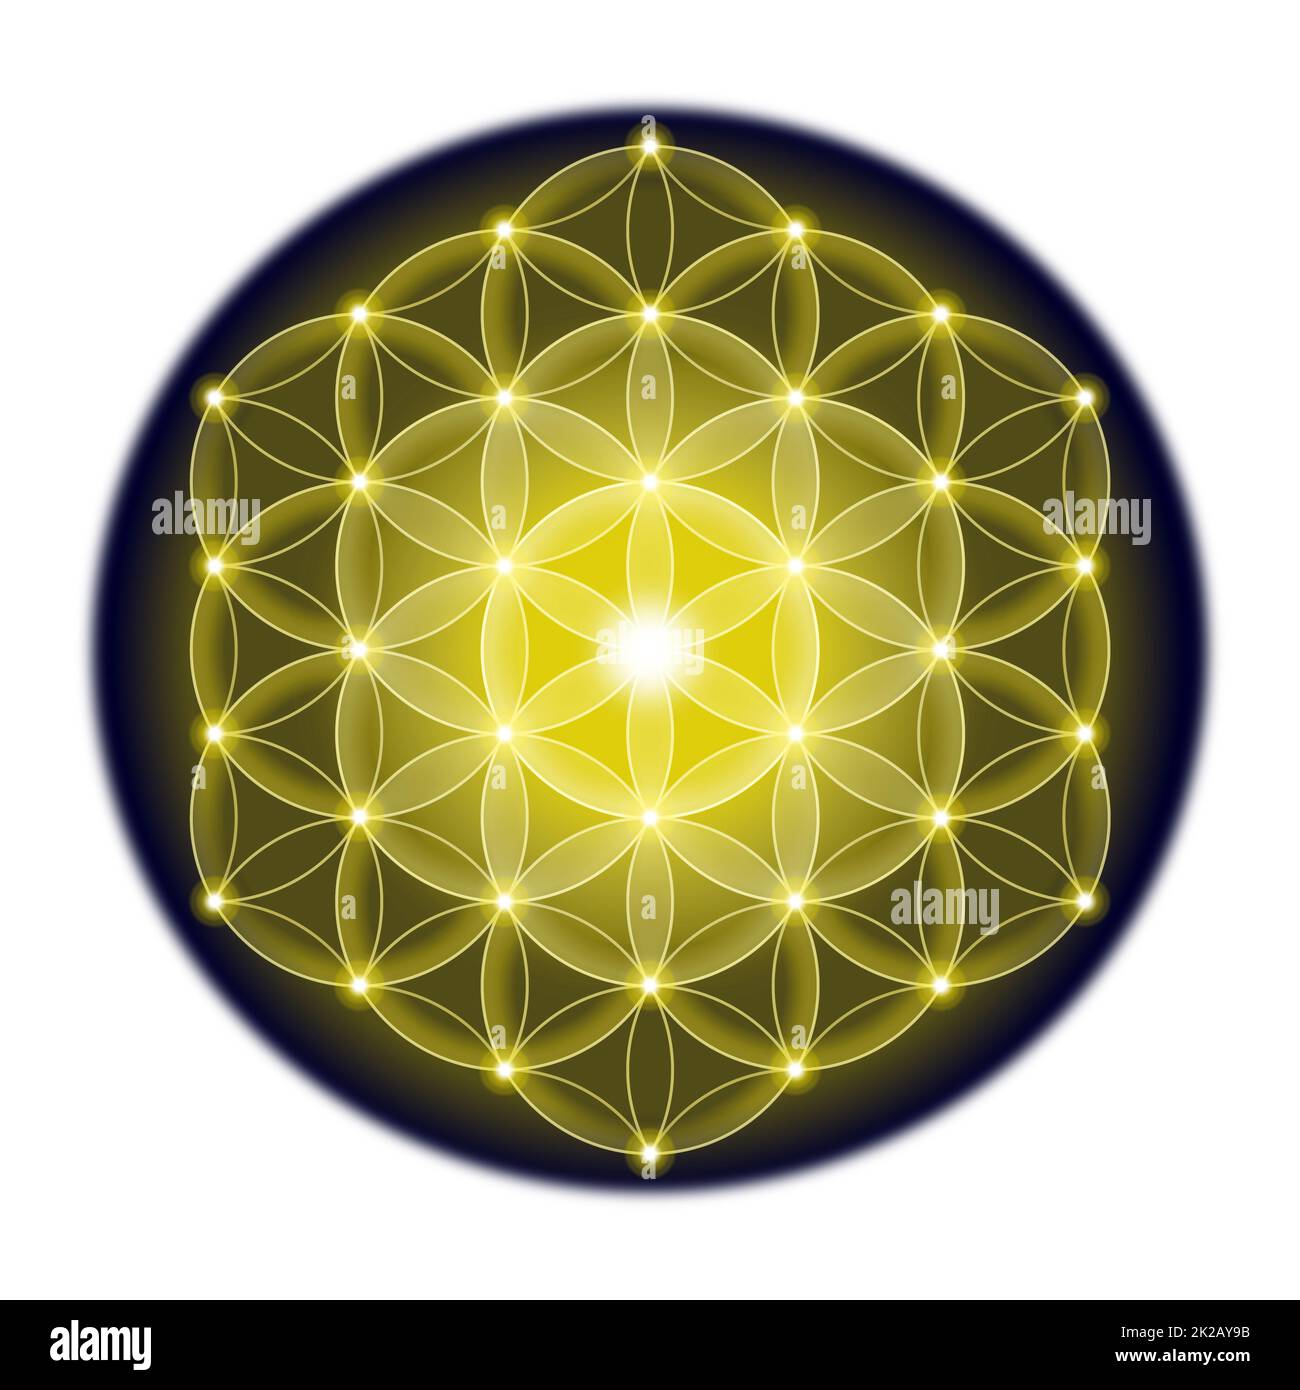 Golden Flower of Life on a black, circle shaped background Stock Photo